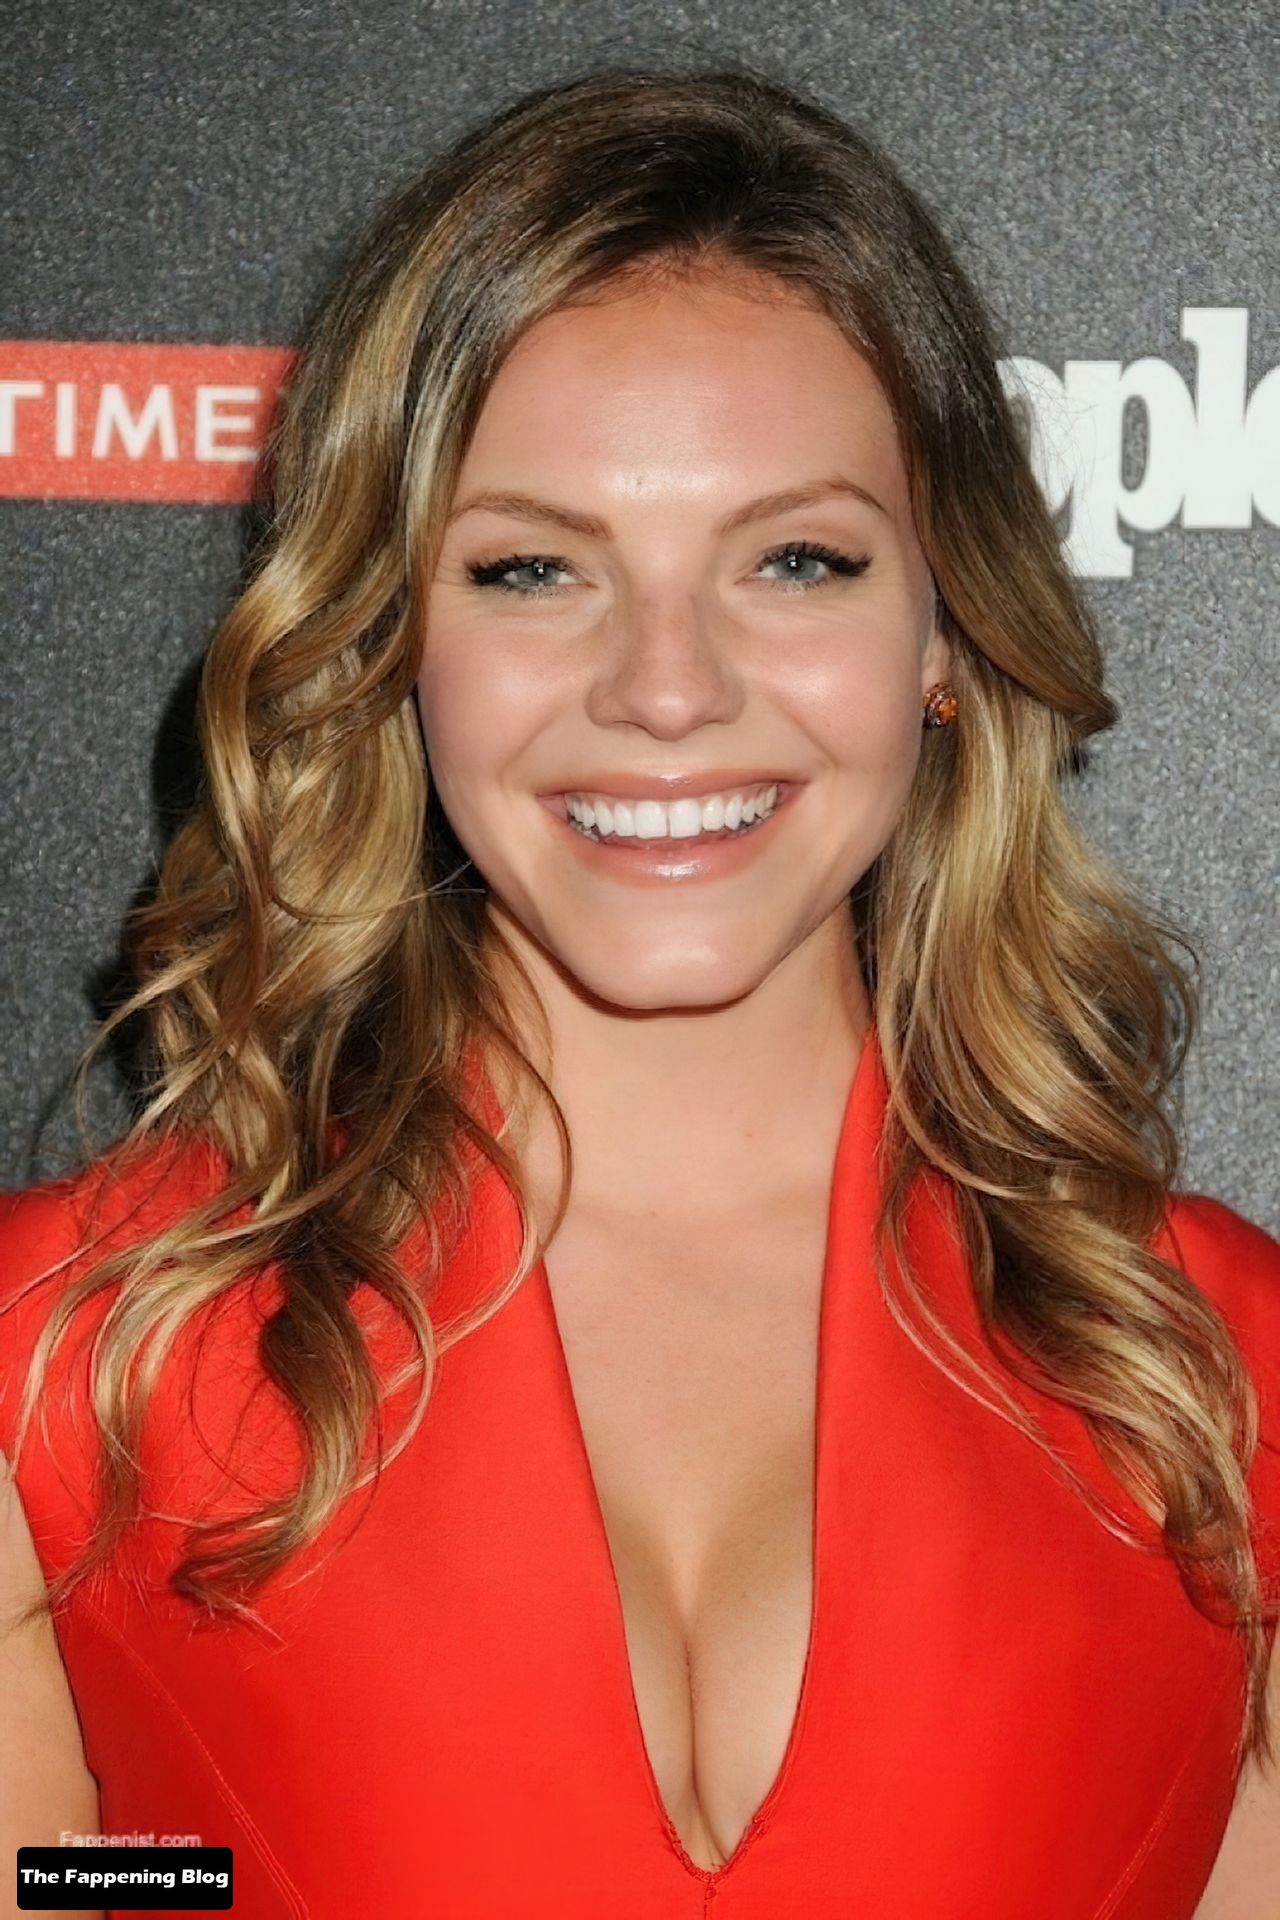 Eloise-Mumford-Sexy-Tits-and-Ass-Photo-Collection-10-thefappeningblog.com-1.jpg